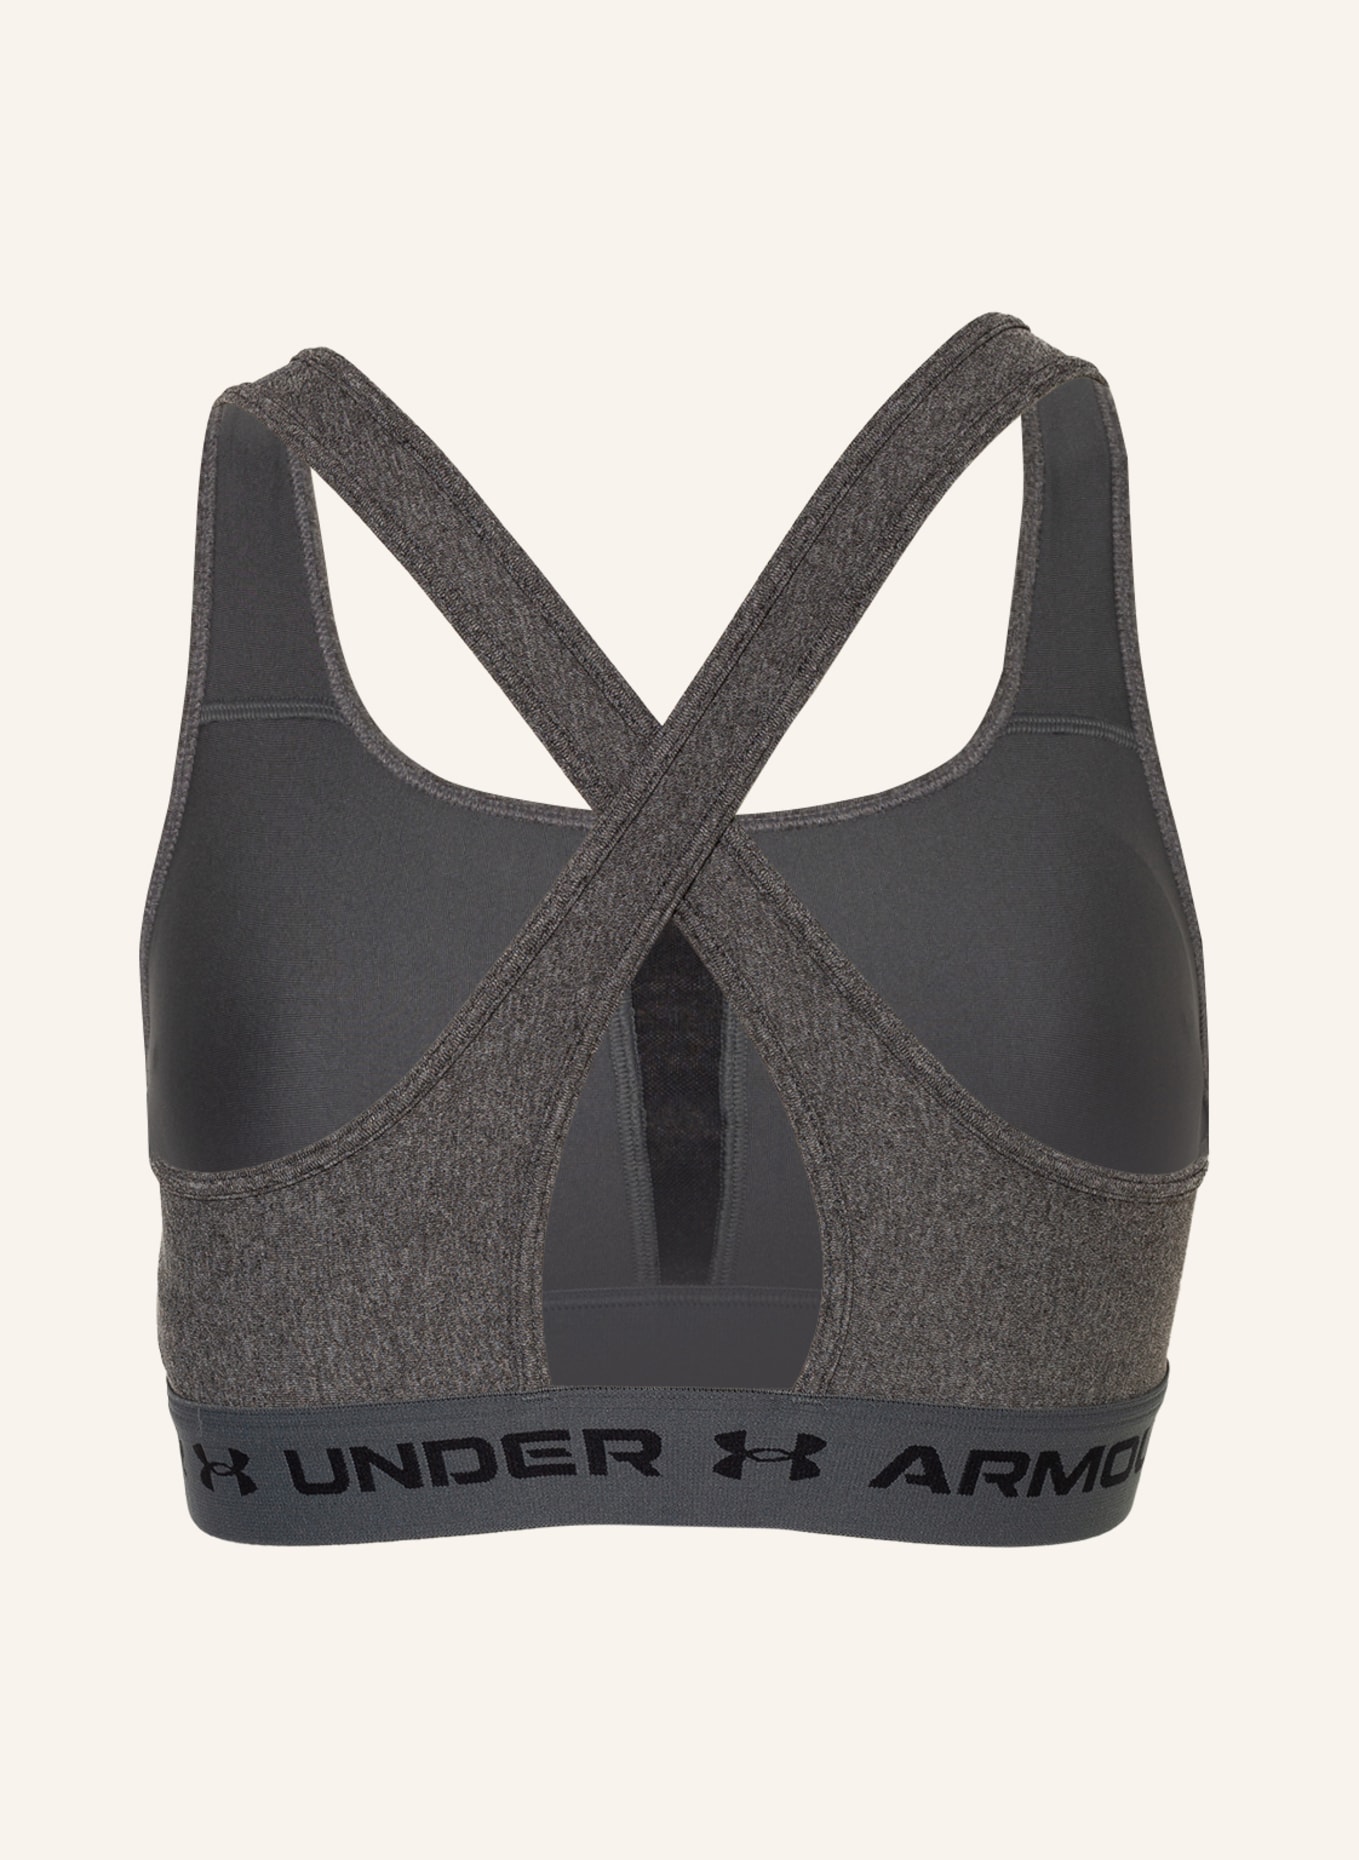 UNDER ARMOUR Sports bra HEATHER, Color: GRAY (Image 2)